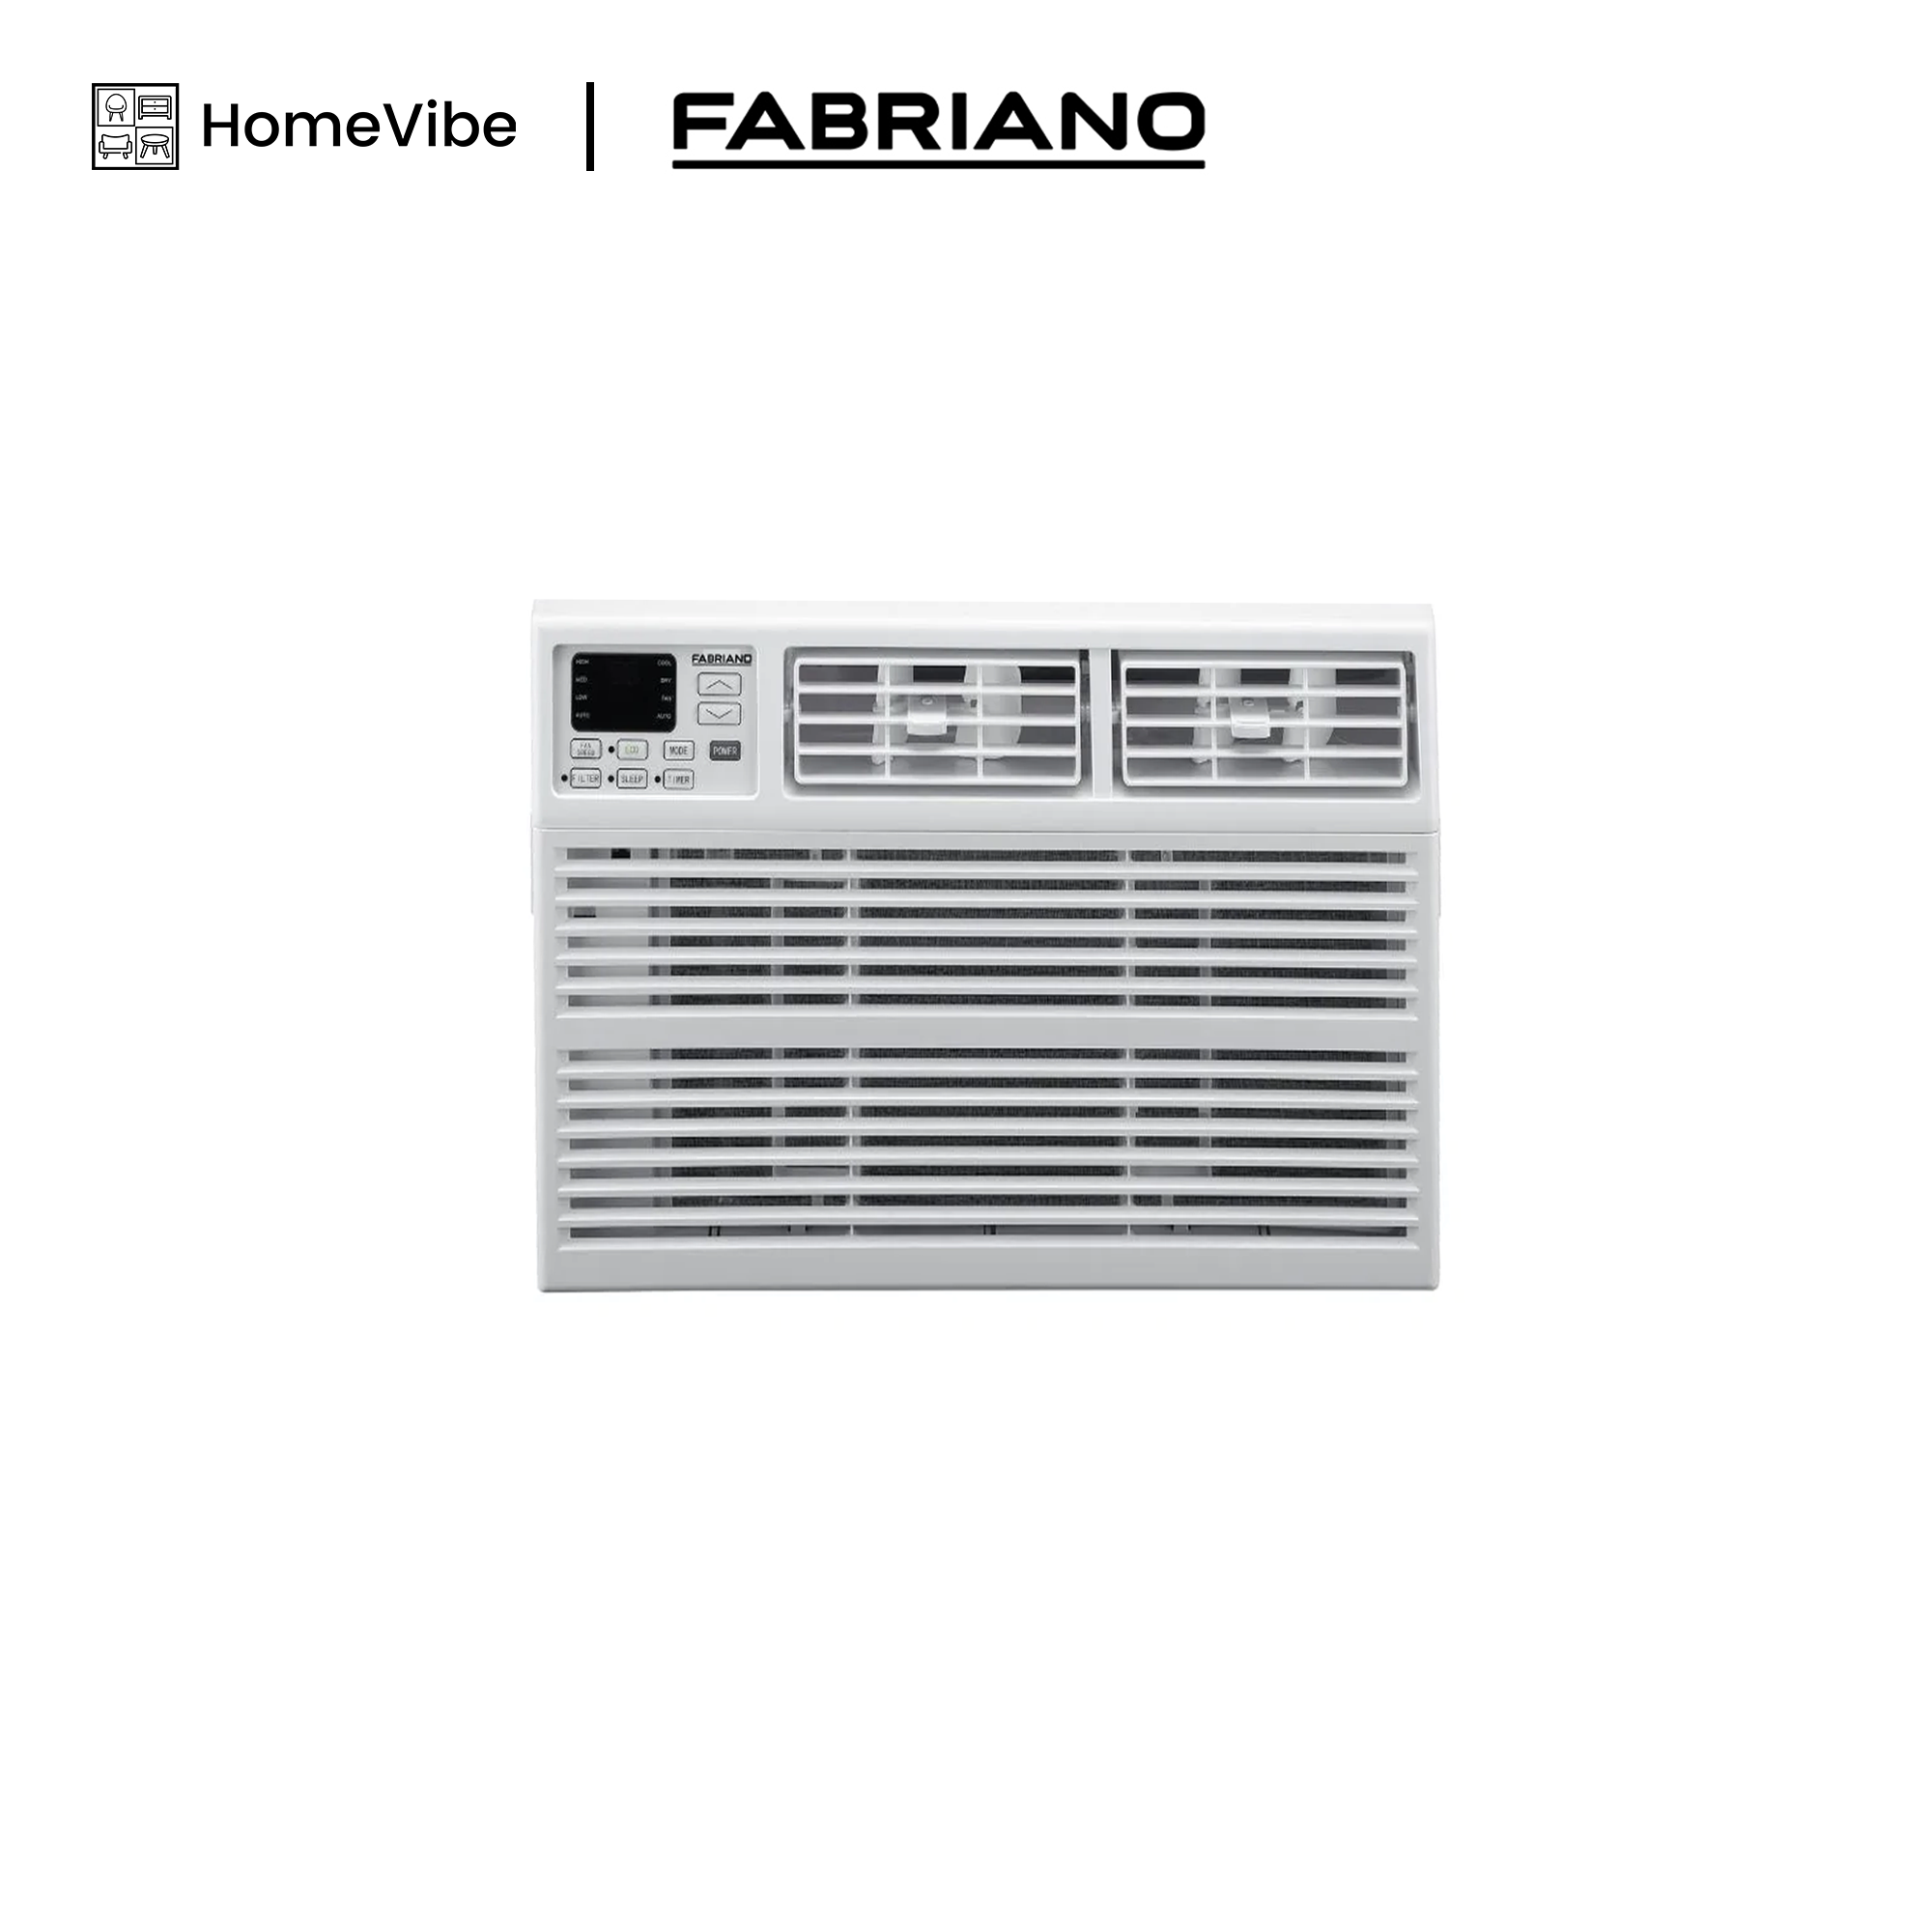 Fabriano 1hp Digital Control Window Type Air Conditioner (Top Discharge) FWE09TW32